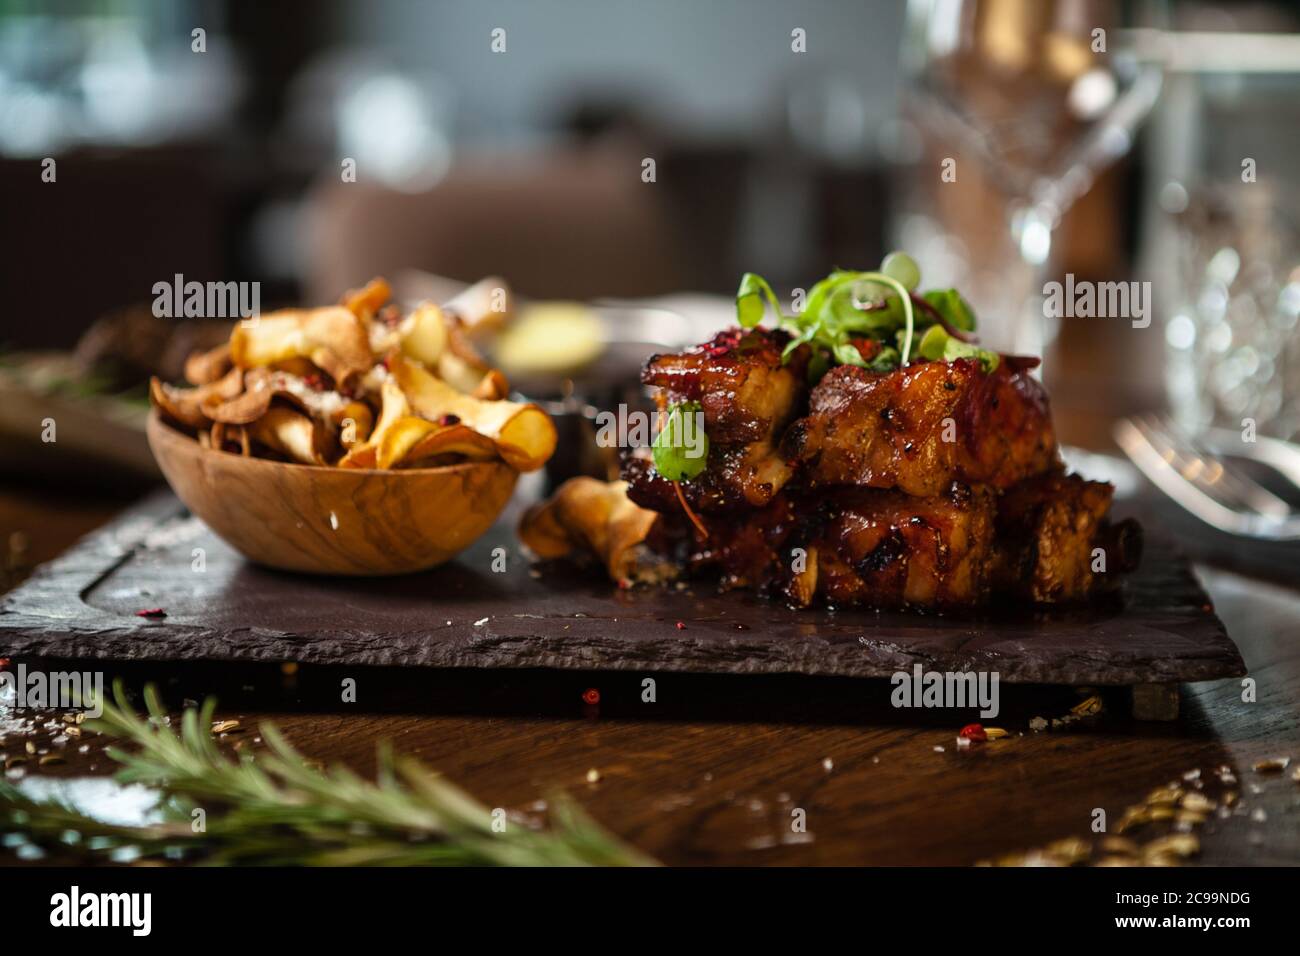 Pork ribs cooked at low temperature. Blackcurrant sauce, parsnip chips with Parmesan cheese. Delicious healthy meat food closeup served on a table for Stock Photo